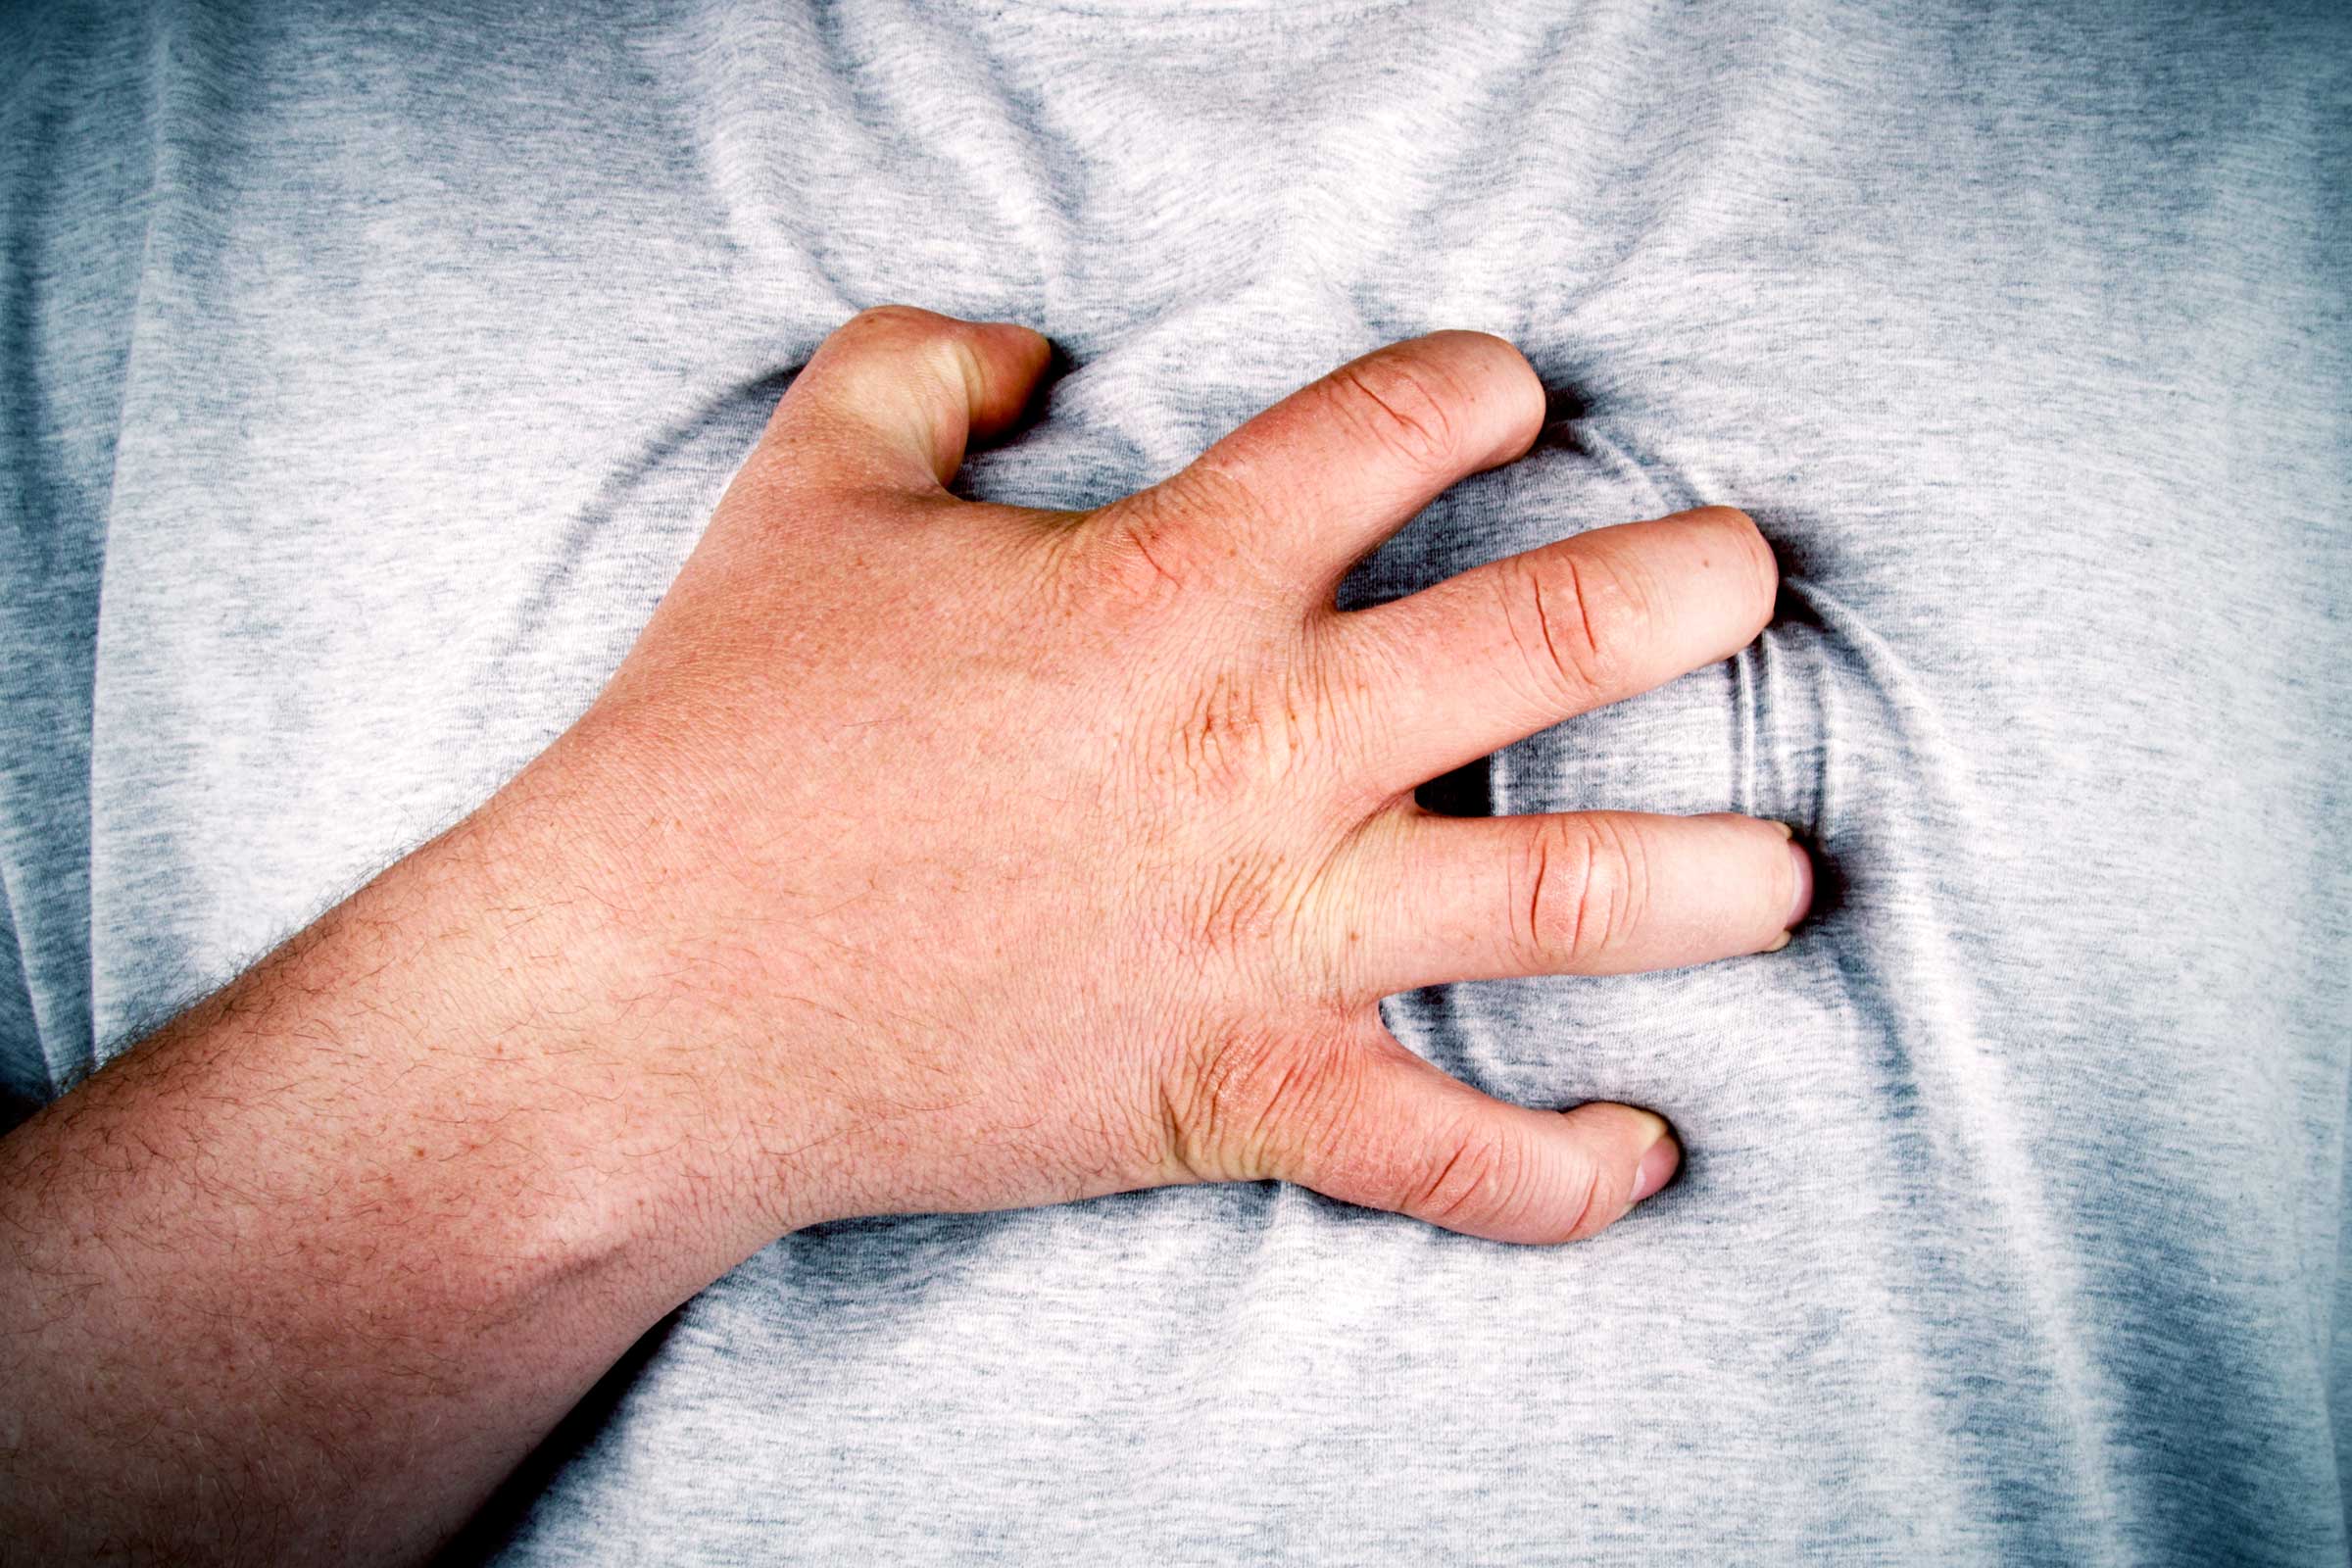 7 things you should never do when someone is having a heart attack